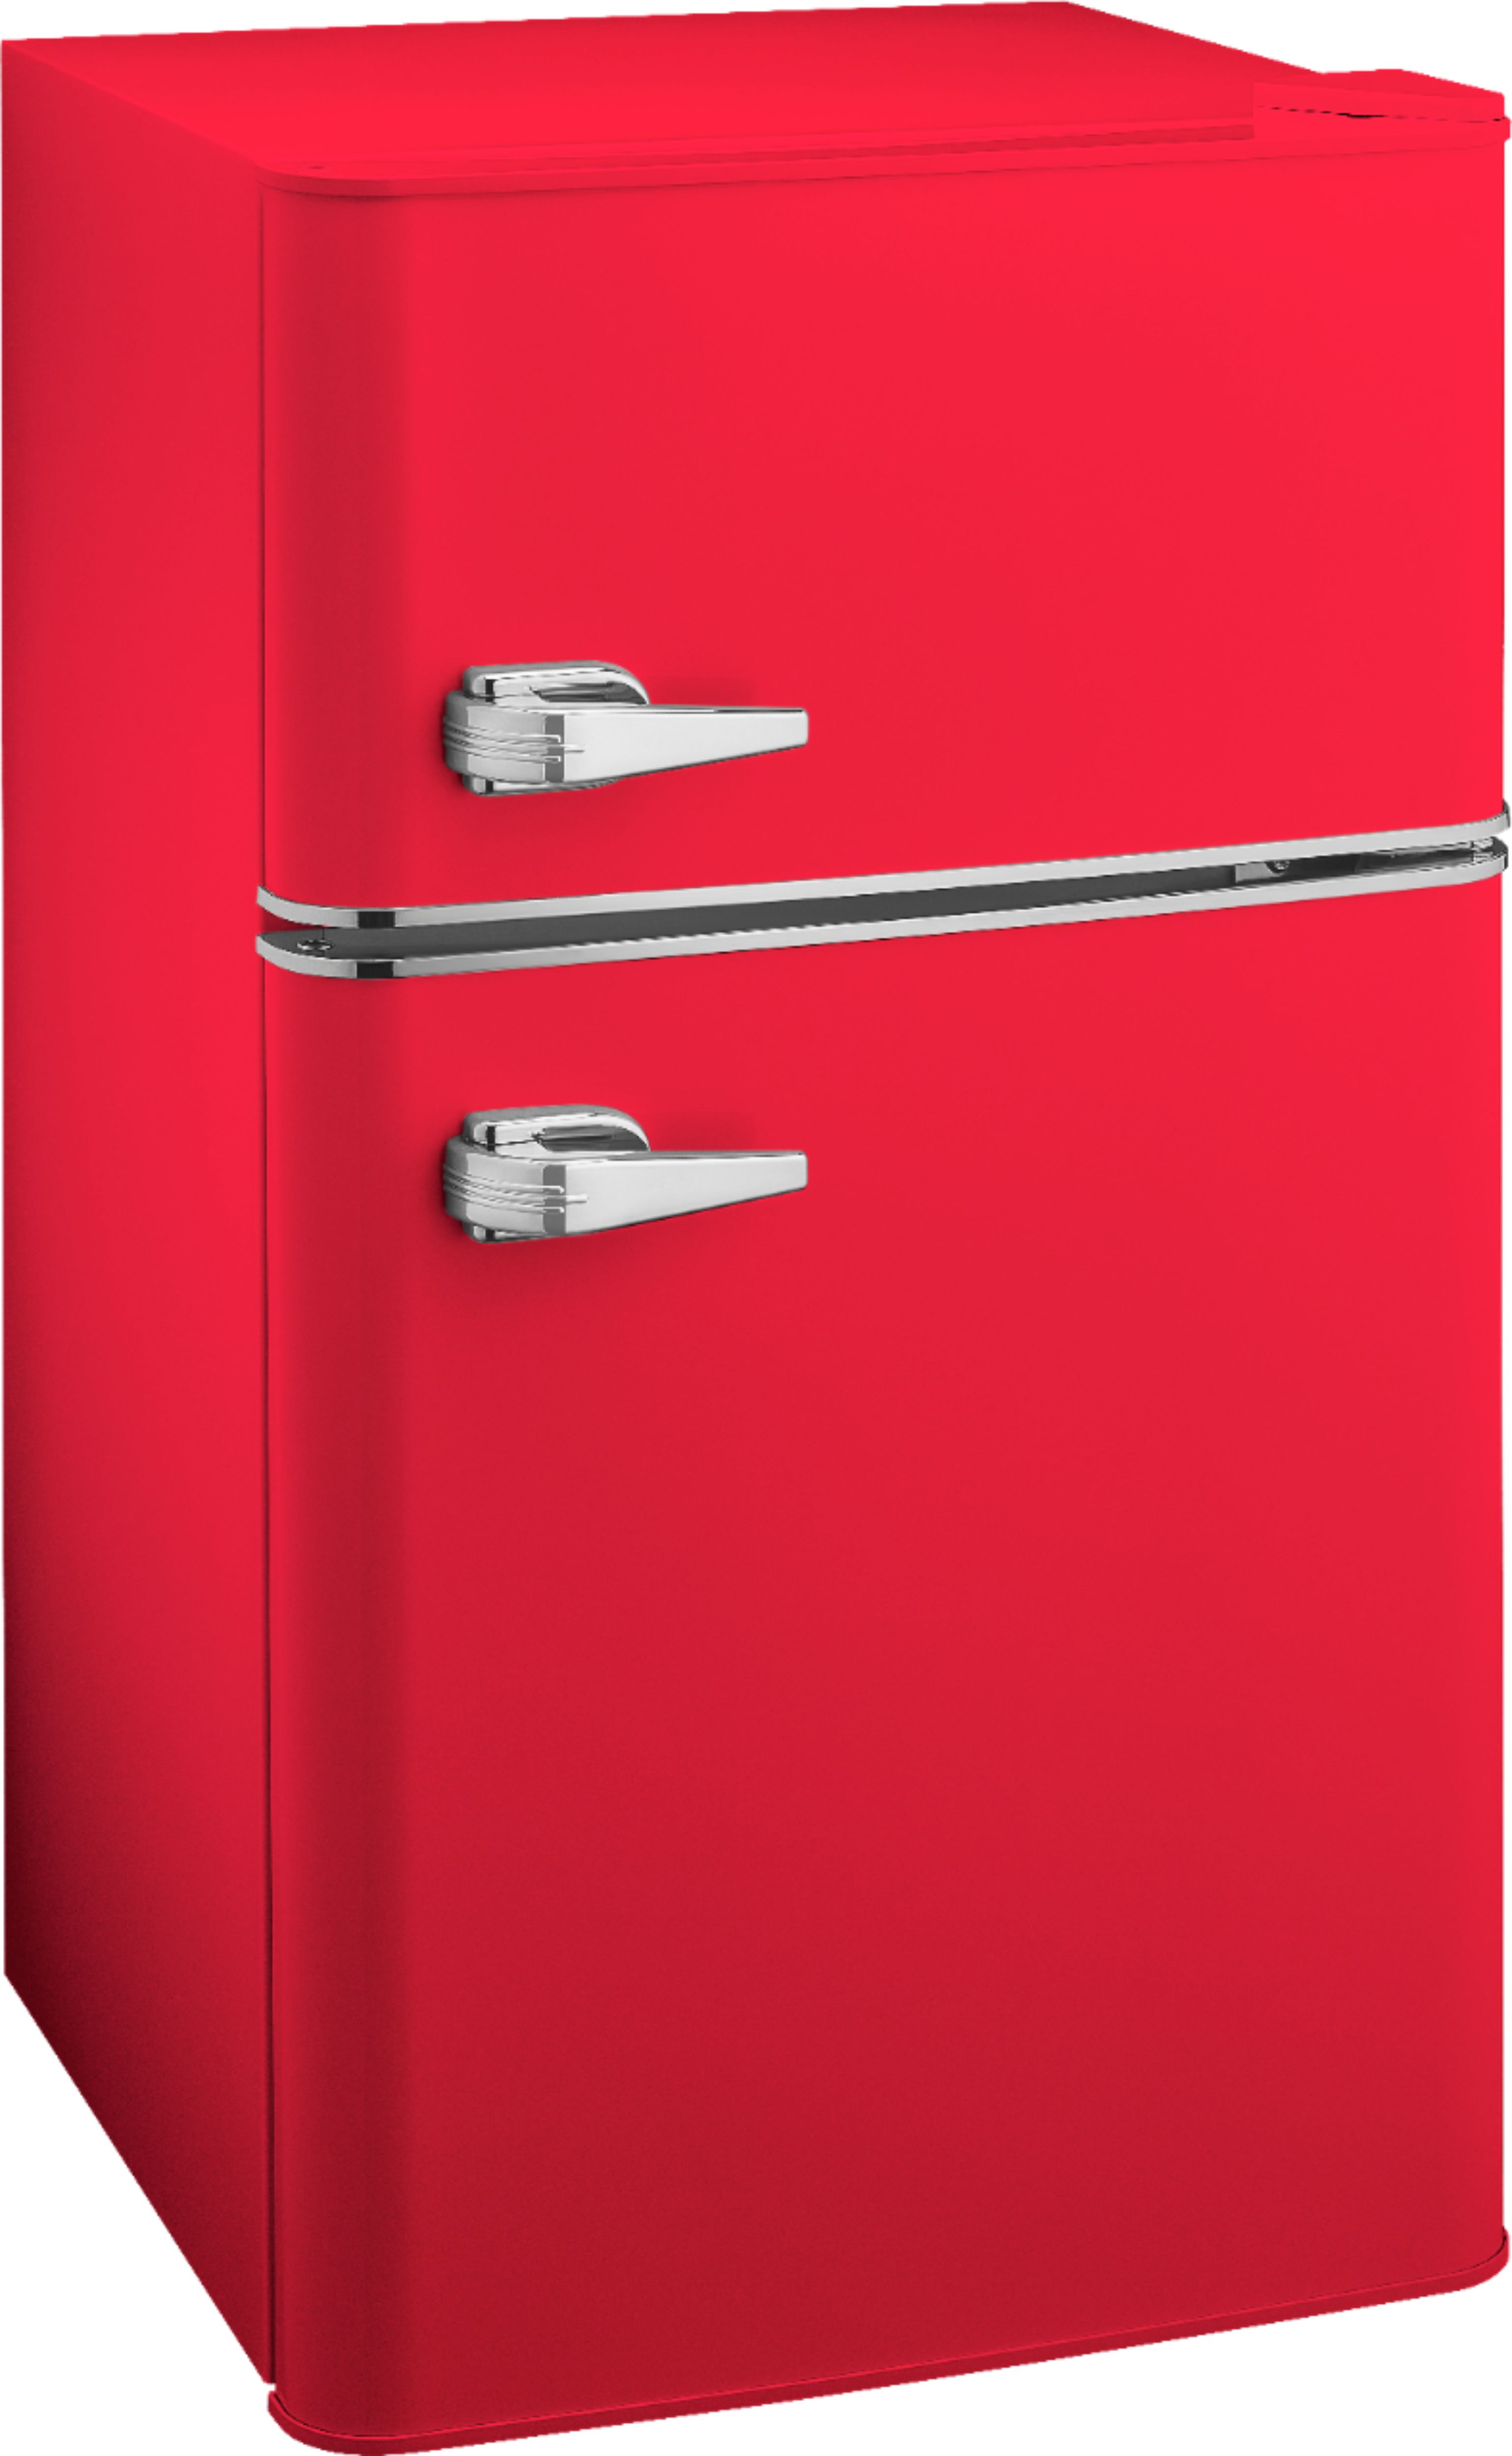 Angle View: Insignia™ - Retro 3.1 cu. ft.  Mini Fridge with Top Freezer and ENERGY STAR Certification - Red